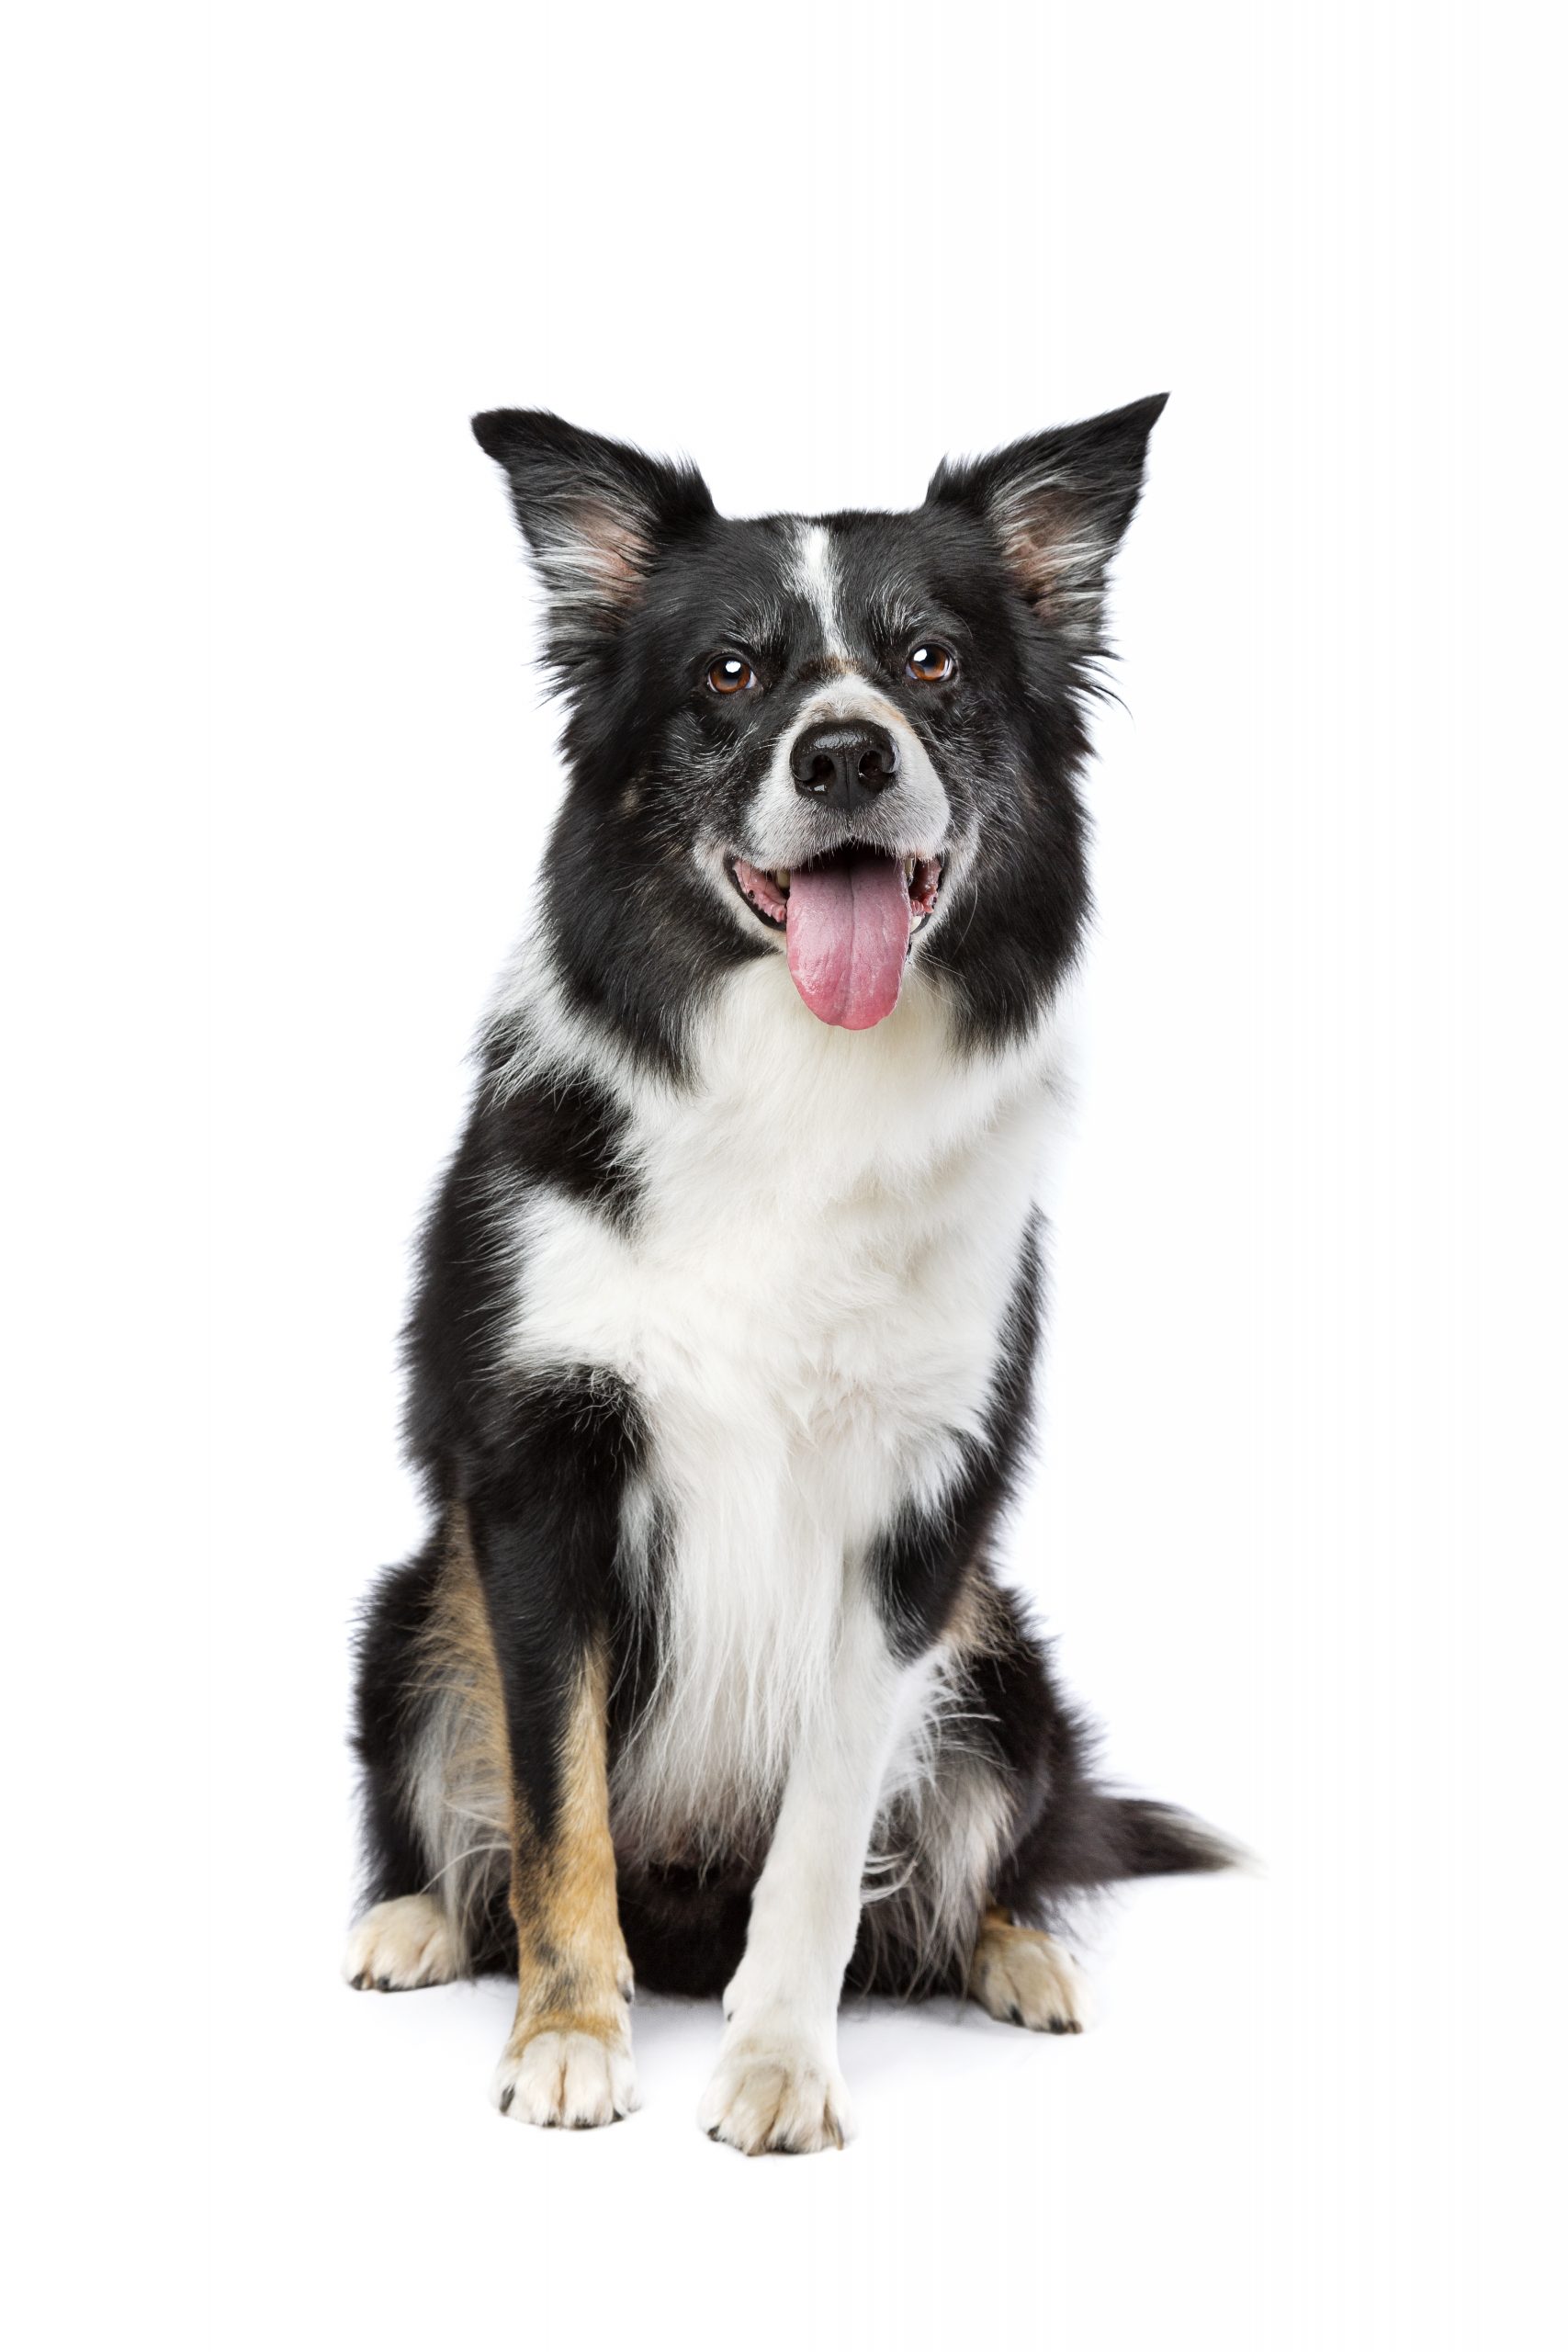 tricoloured border collie dog in front of a white background